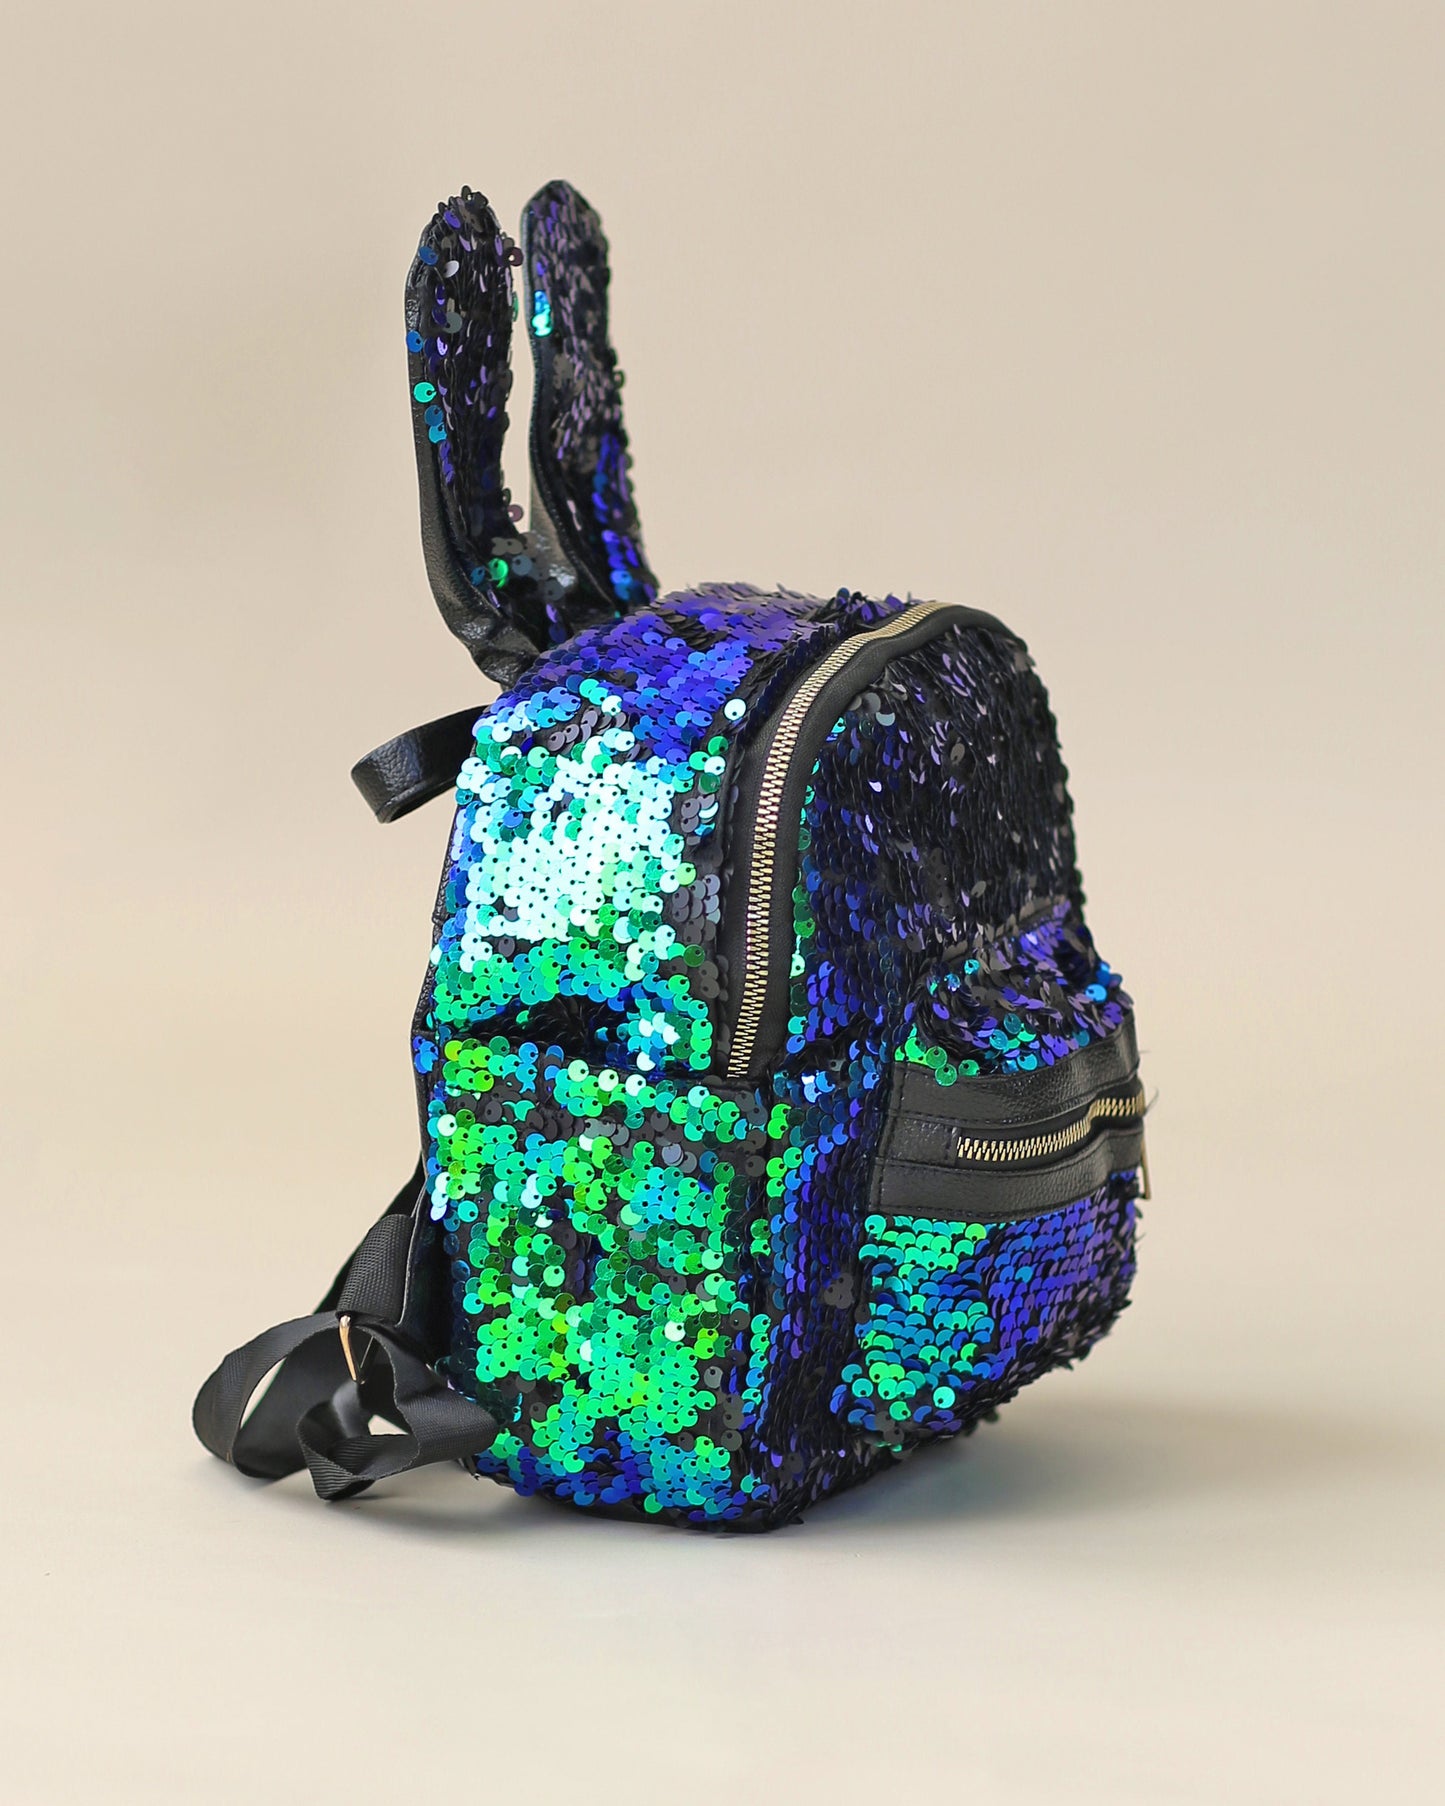 Green and Blue Bunny Backpack - Bunny Backpack - Bunny Bag - Reversible Sequin Backpack - Sequin Backpack - Sequin Bag